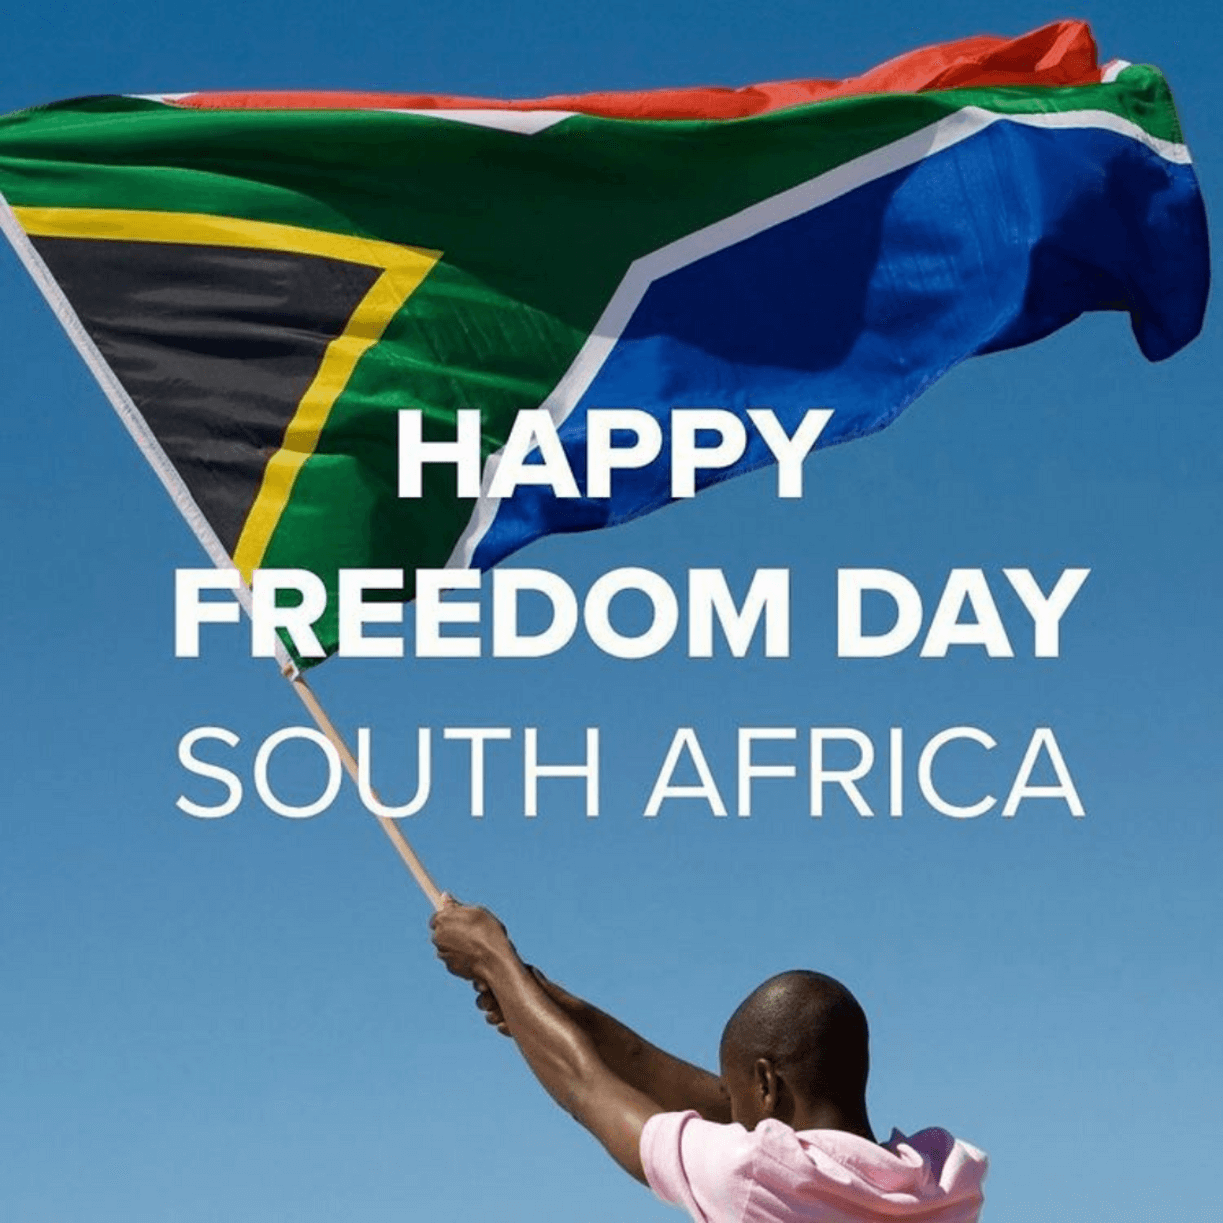 12 Facts about Freedom Day in South Africa